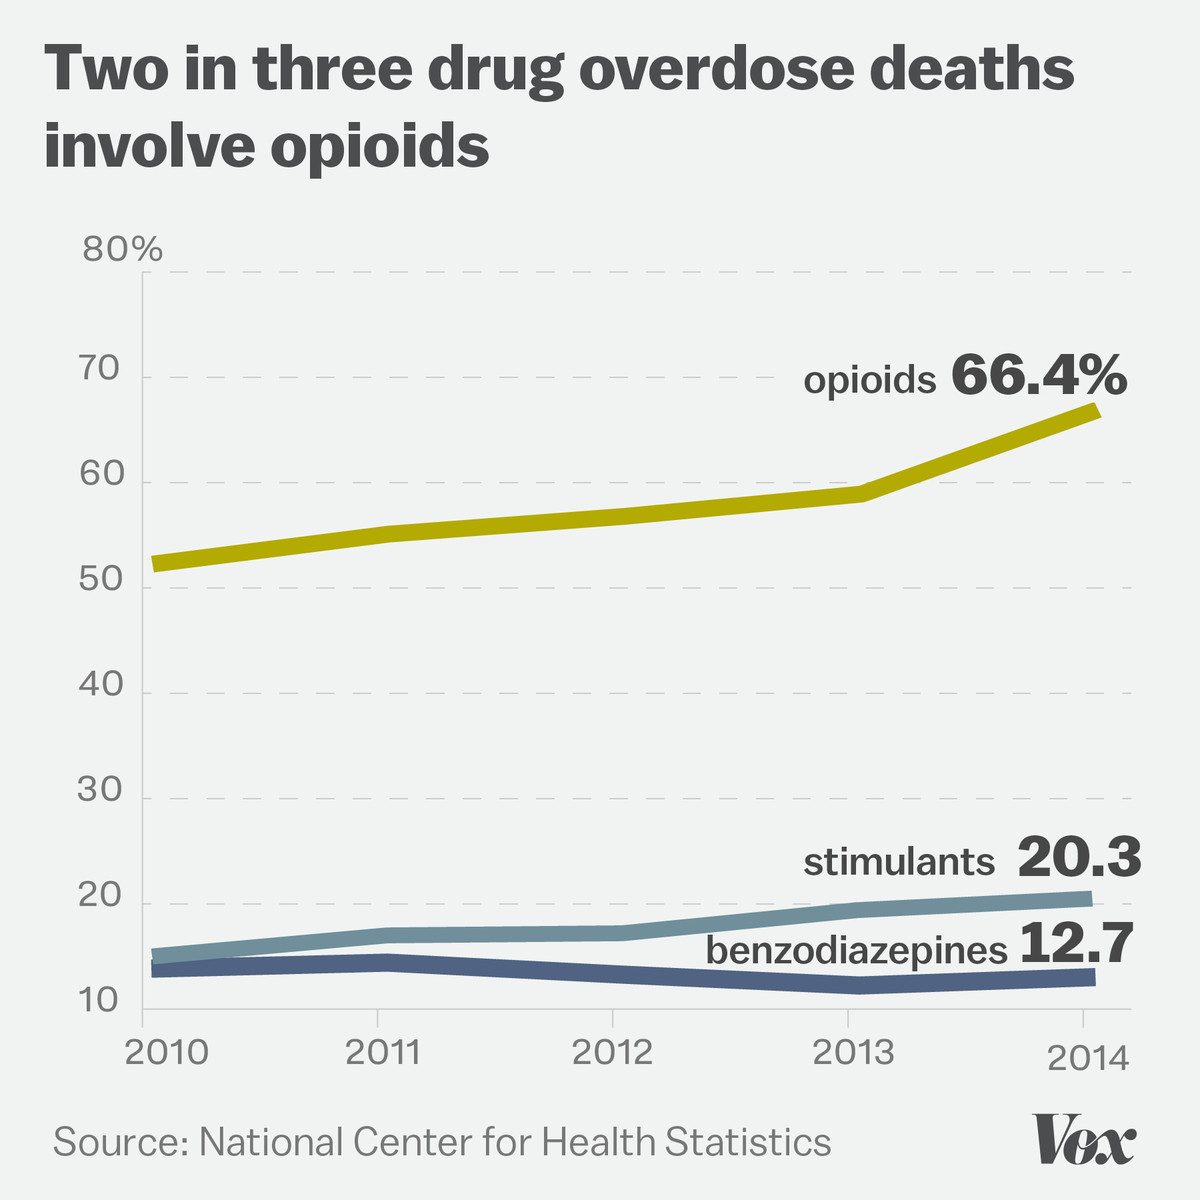 Chart showing the prevalence of opioids in drug overdose deaths in the US